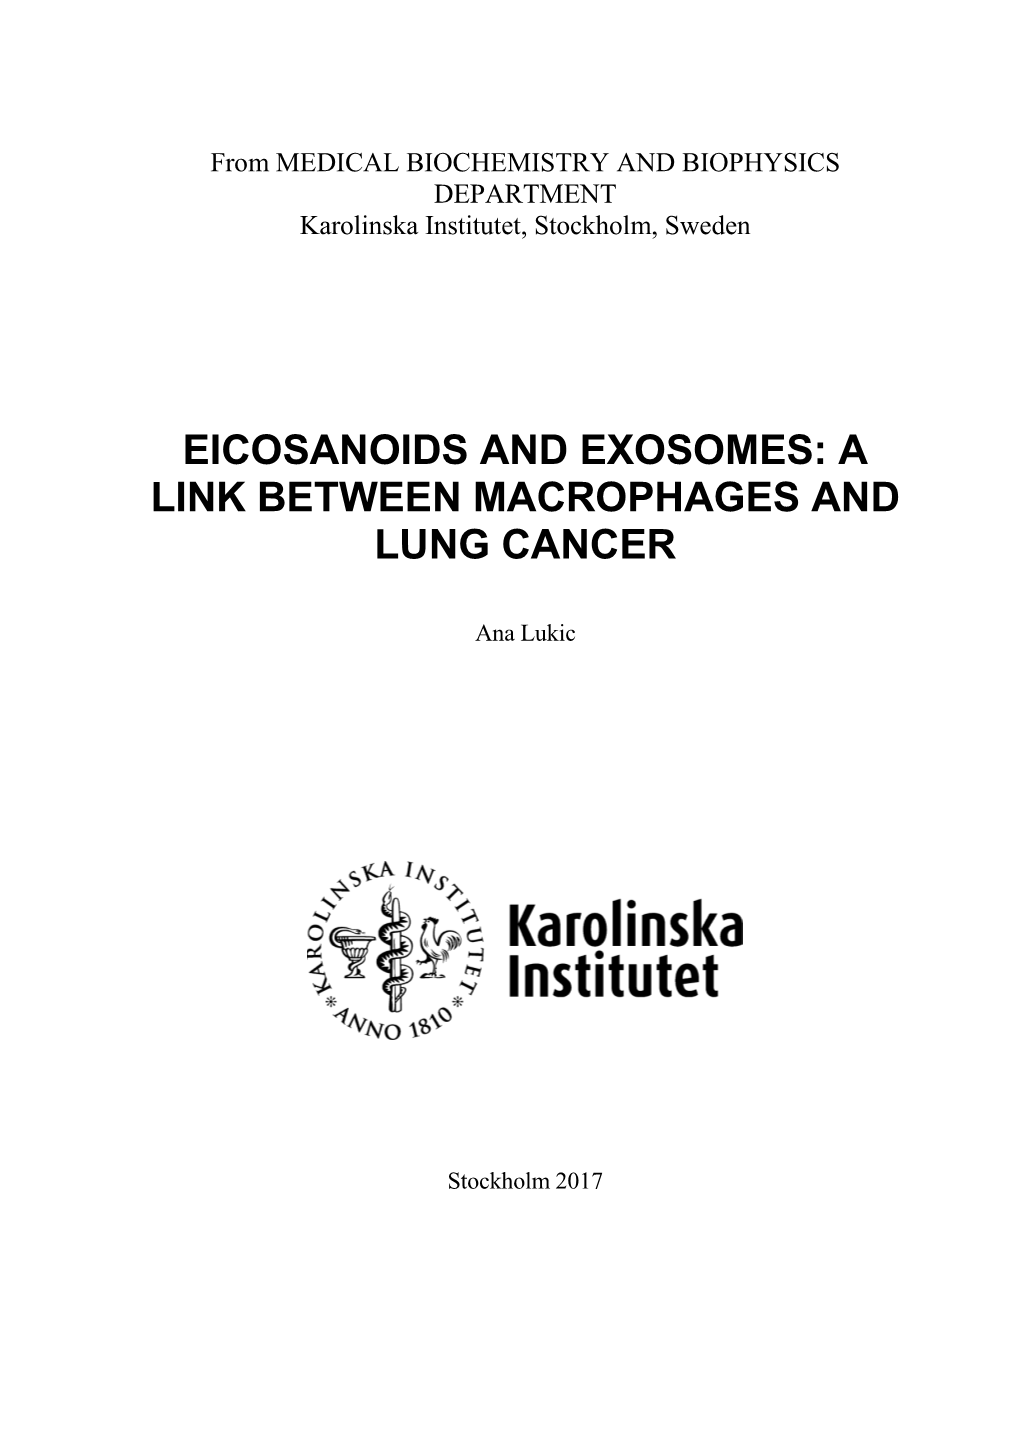 Eicosanoids and Exosomes: a Link Between Macrophages and Lung Cancer